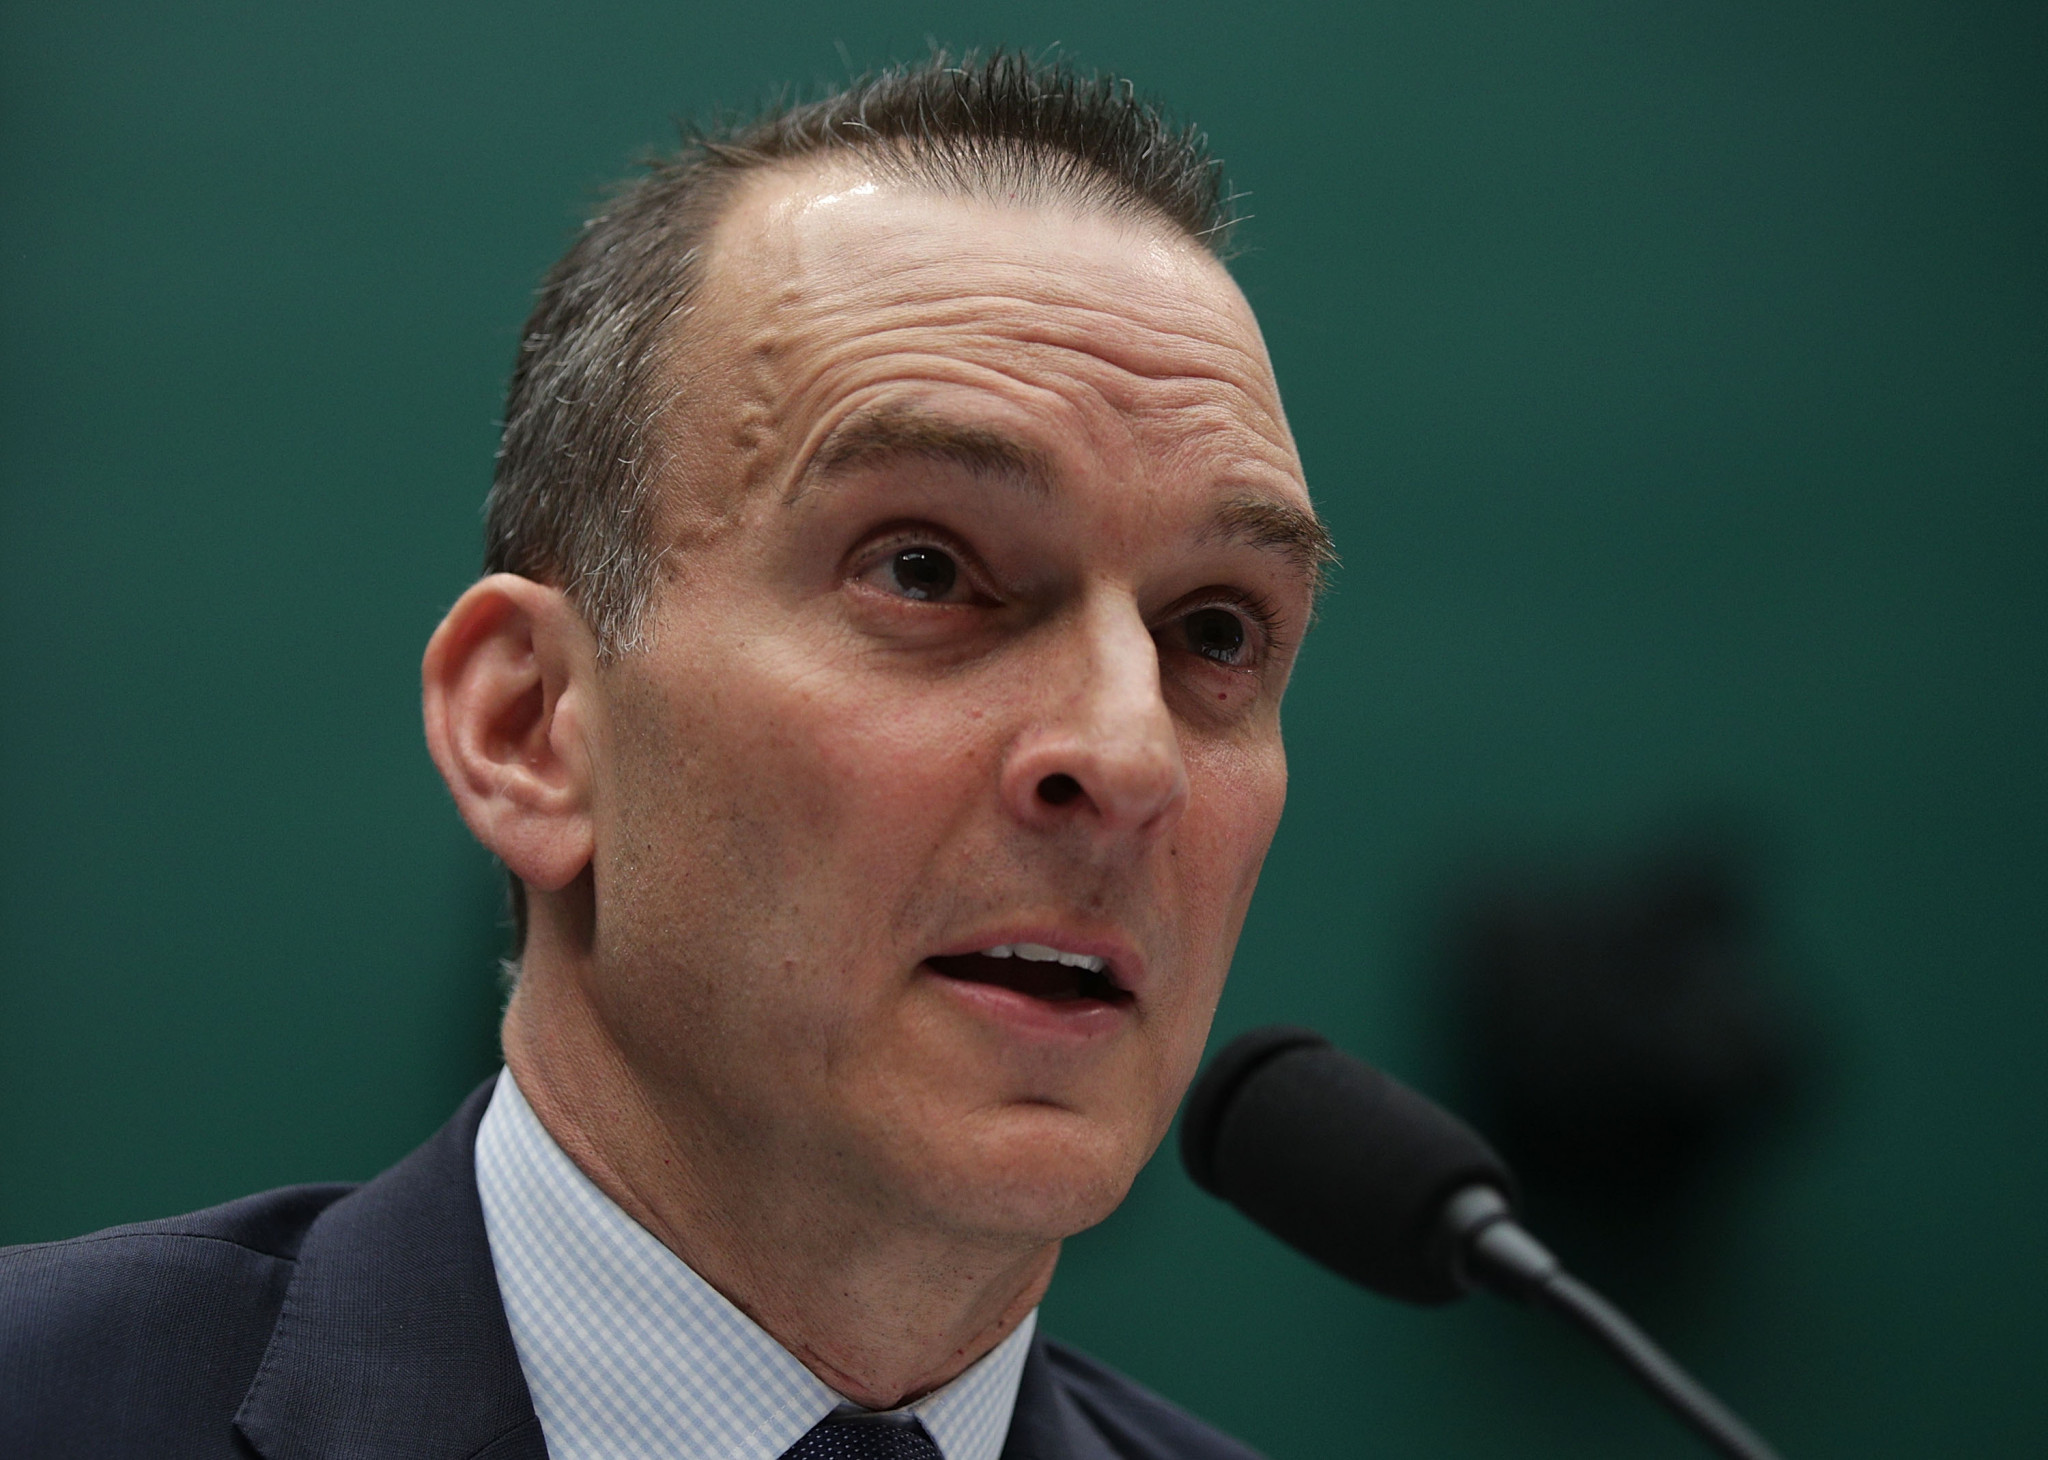 USADA chief executive Travis Tygart claimed WADA promises of reform have been unfulfilled ©Getty Images